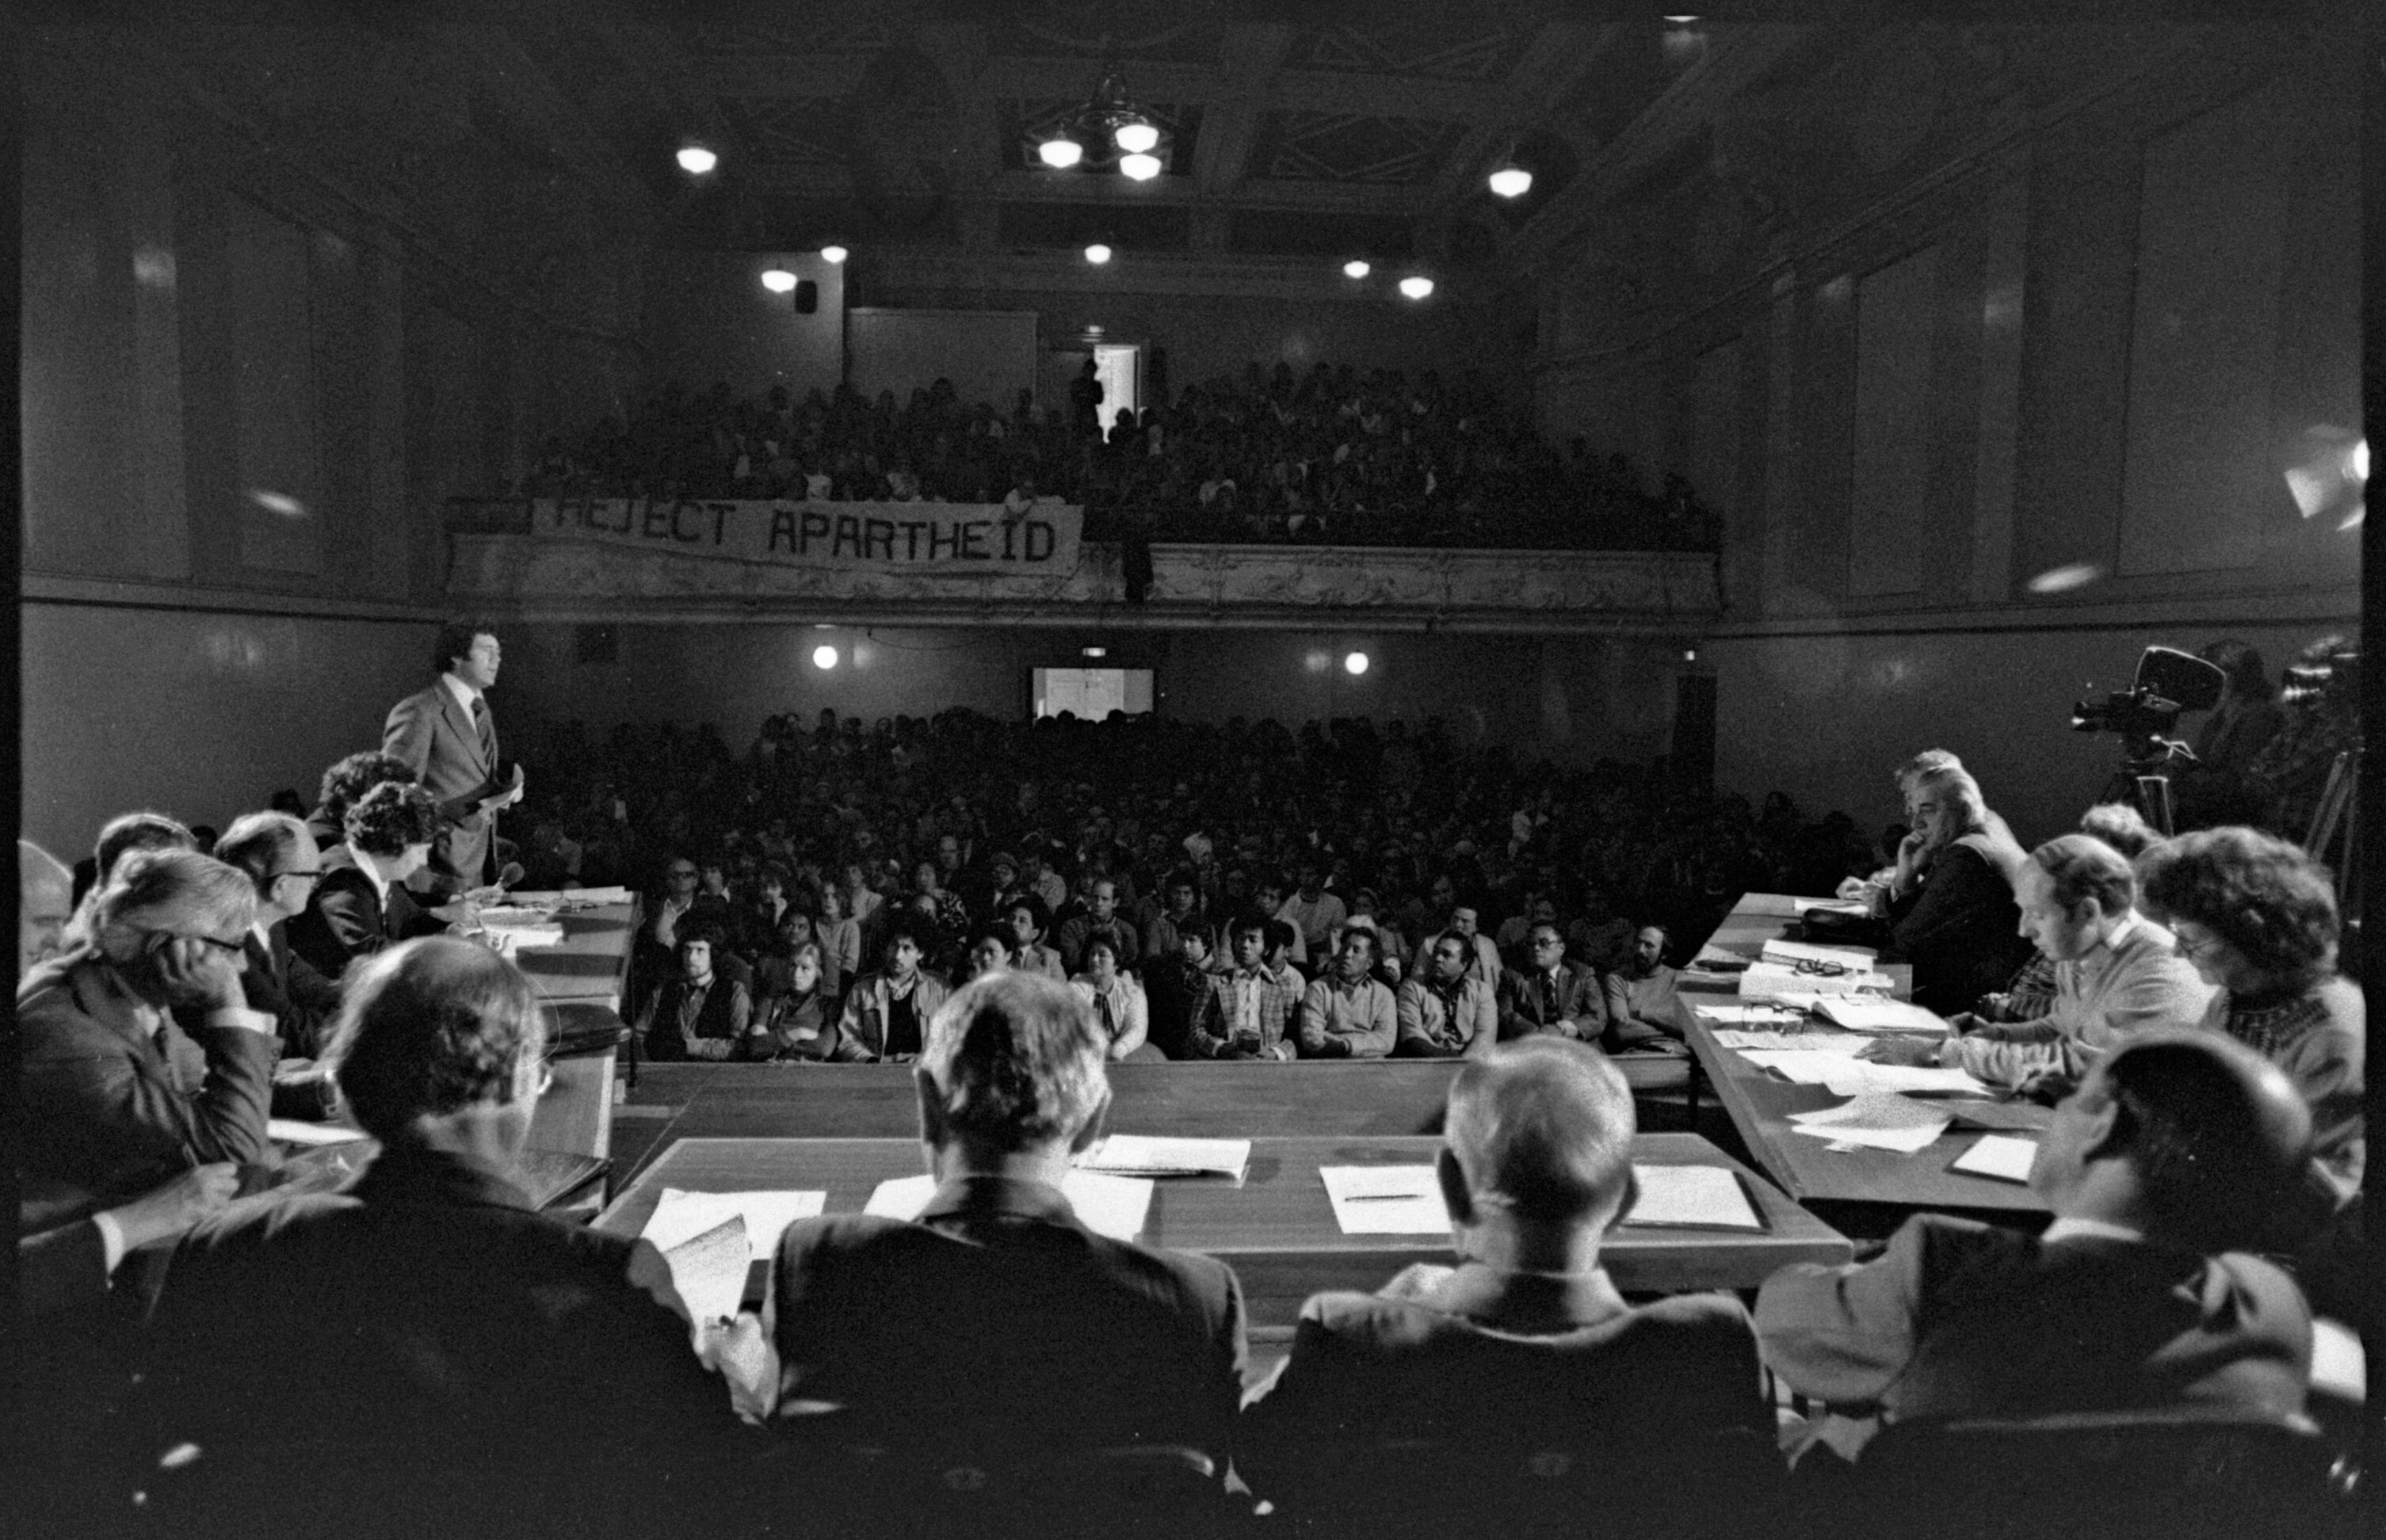 A black and white image shows a meeting on stage with a packed audience. 